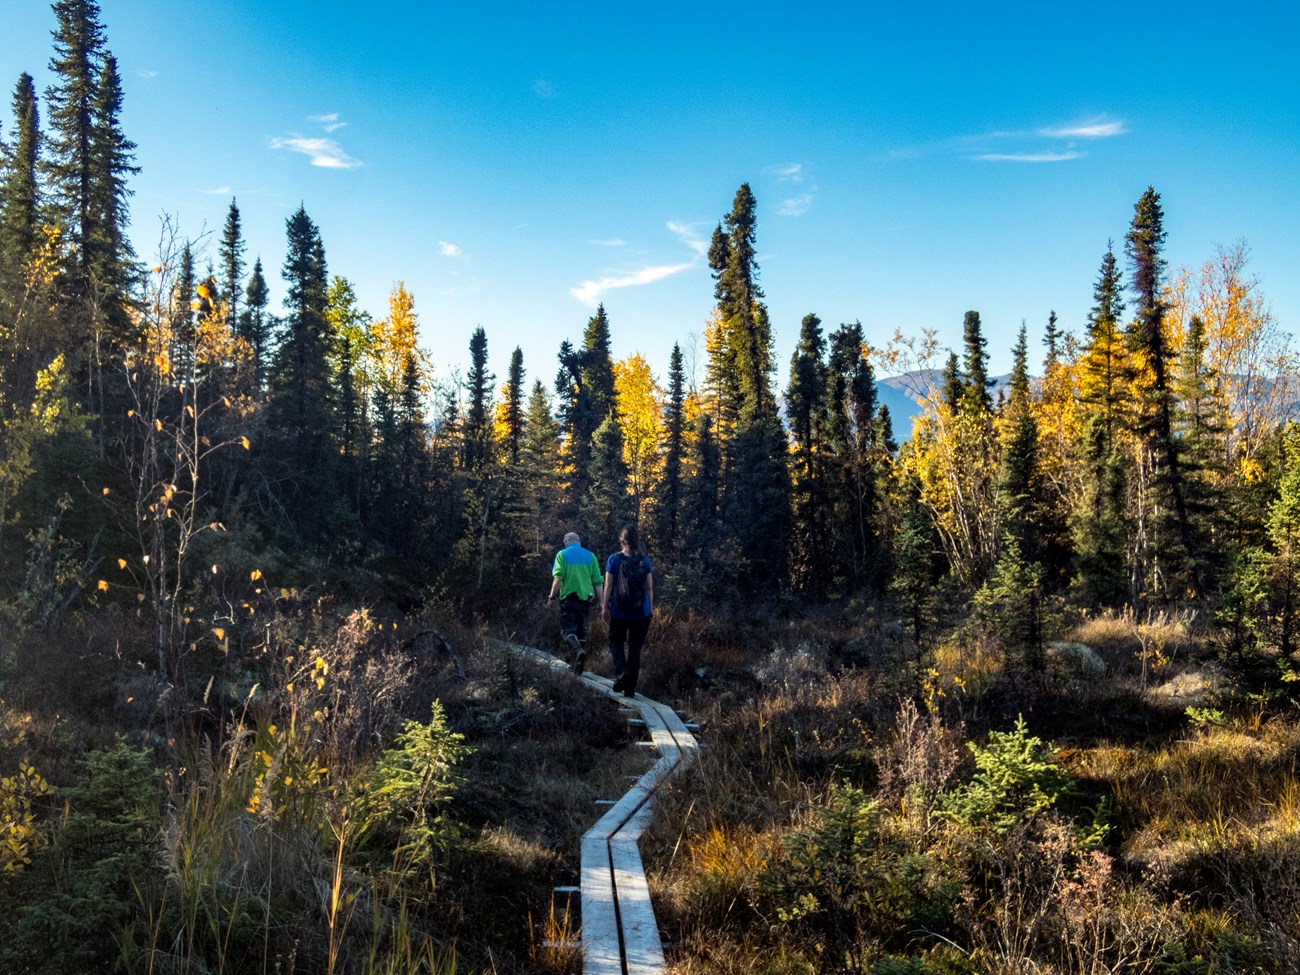 yellow birch trees surround a narrow boardwalk with two hikers on it